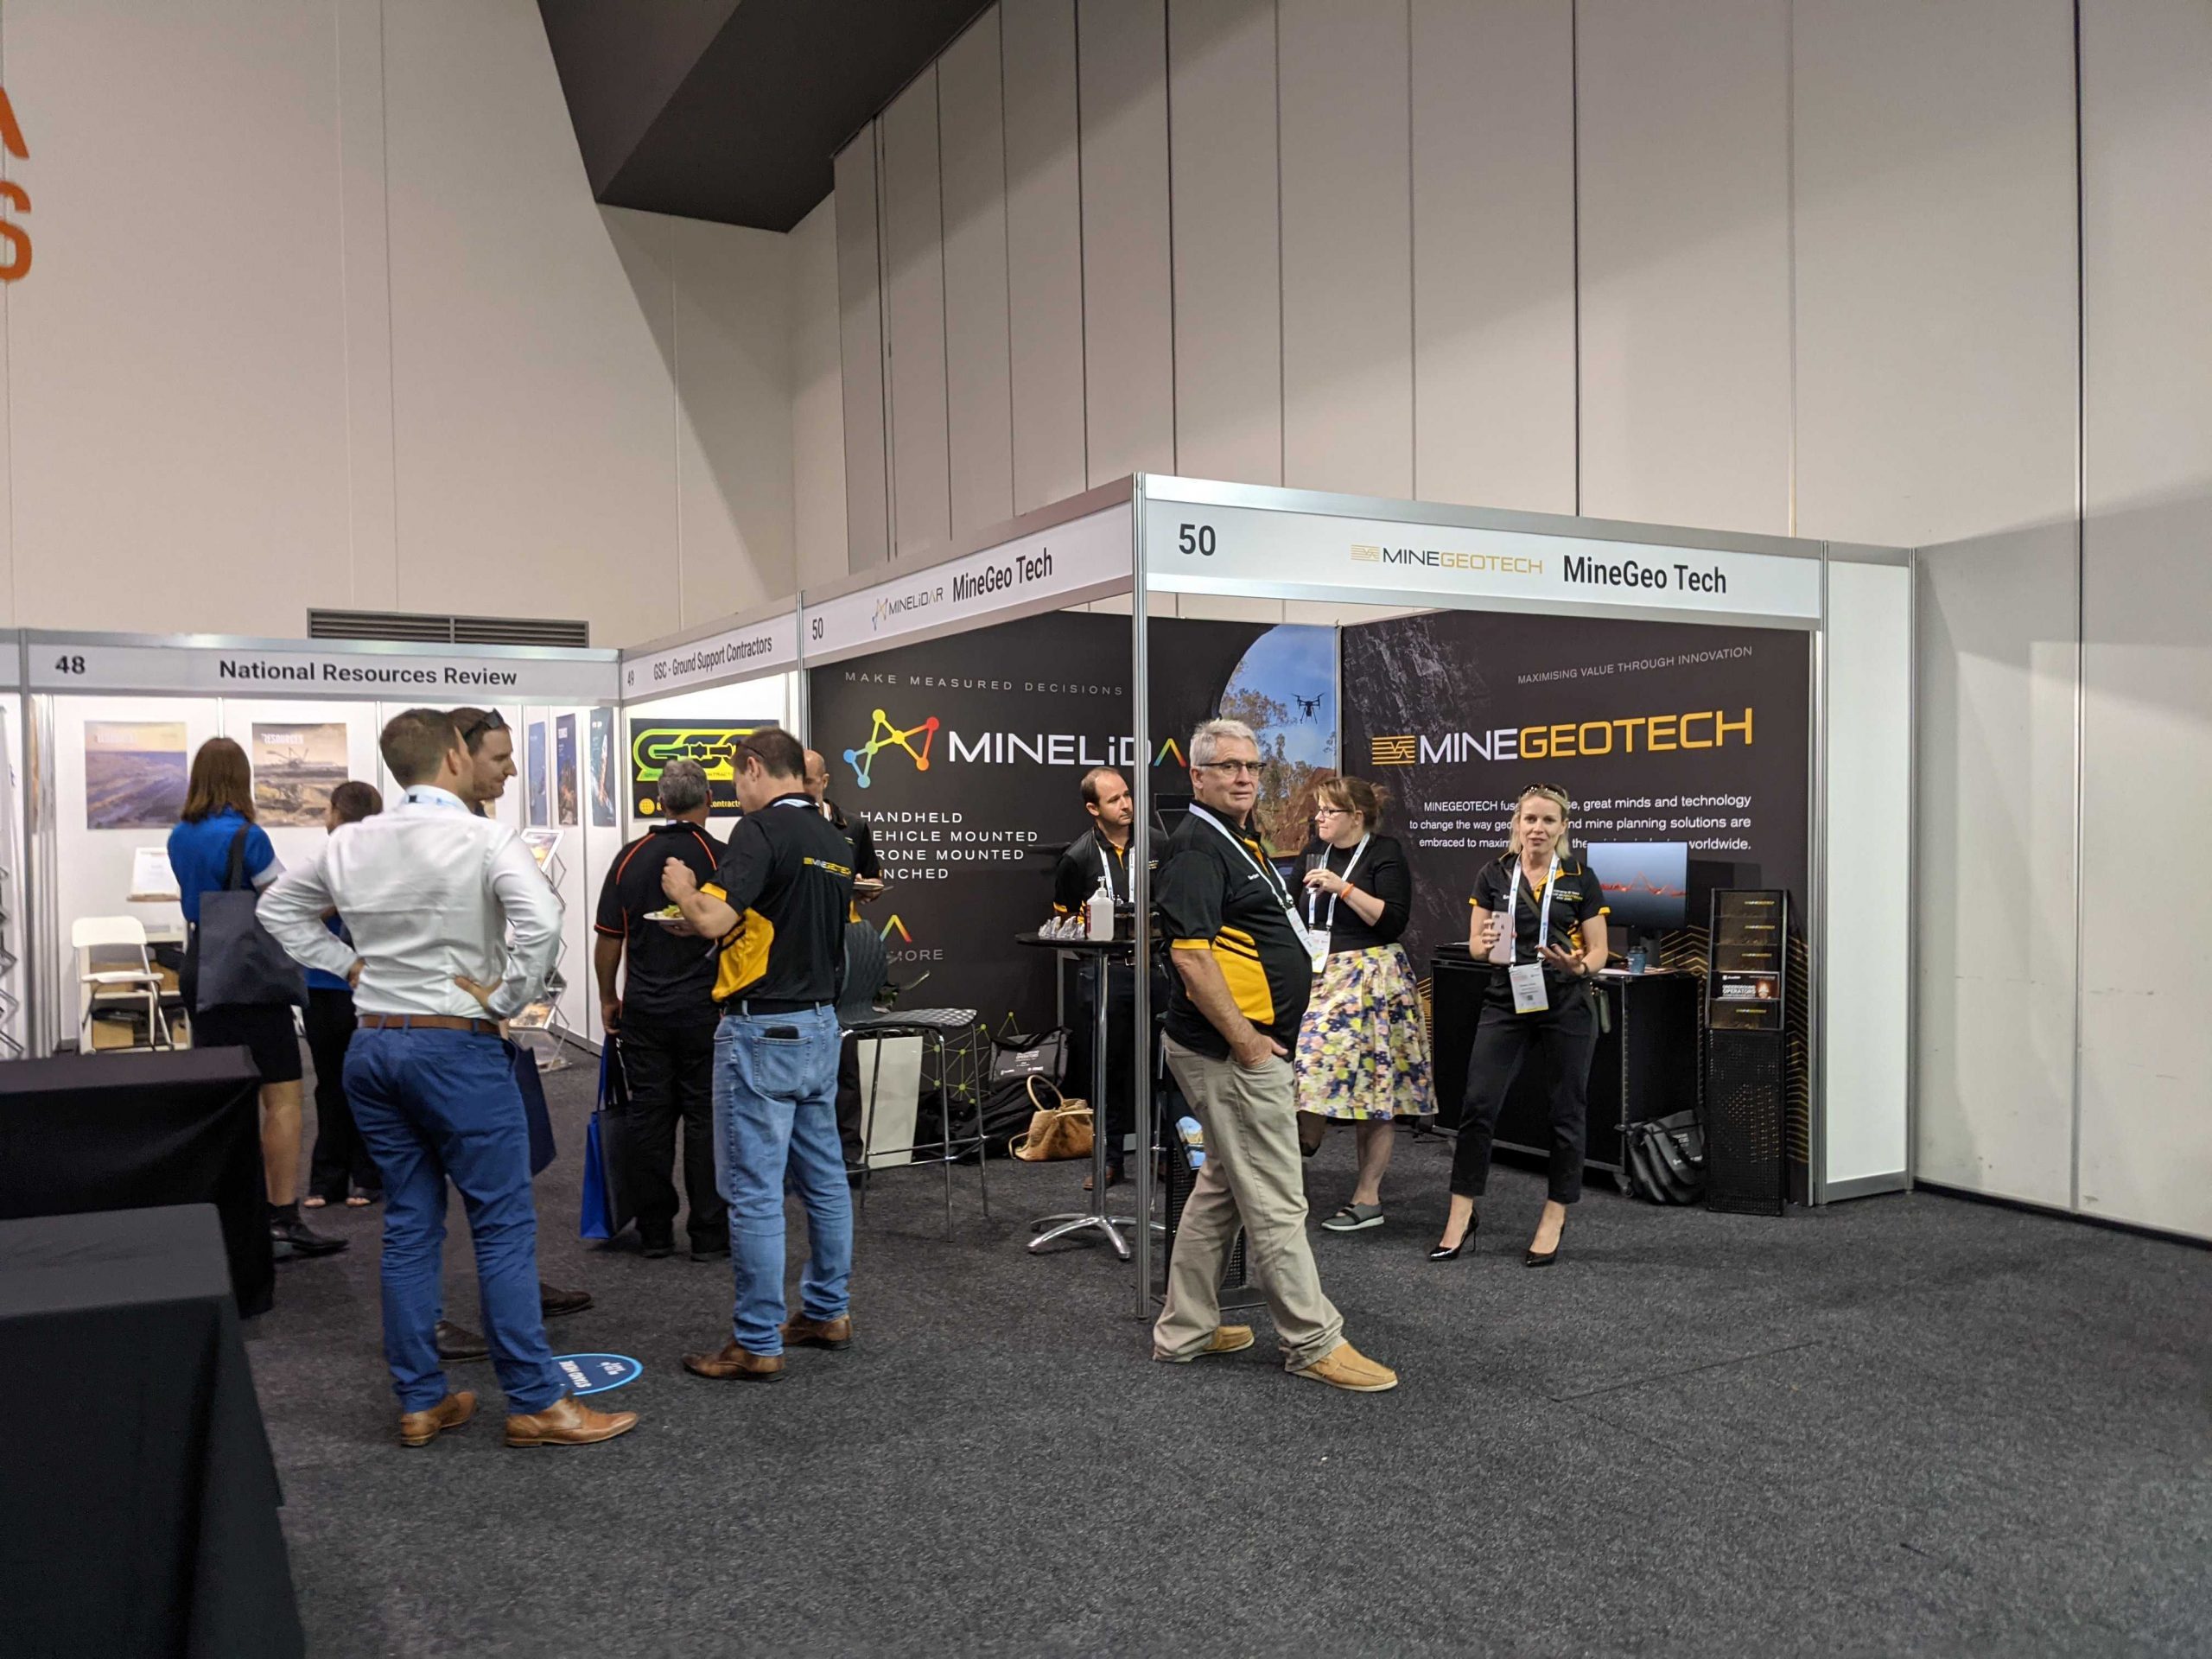 MineGeoTech and MineLiDAR at the AusIMM Underground Operators Conference 2021 - Mining Underground Services